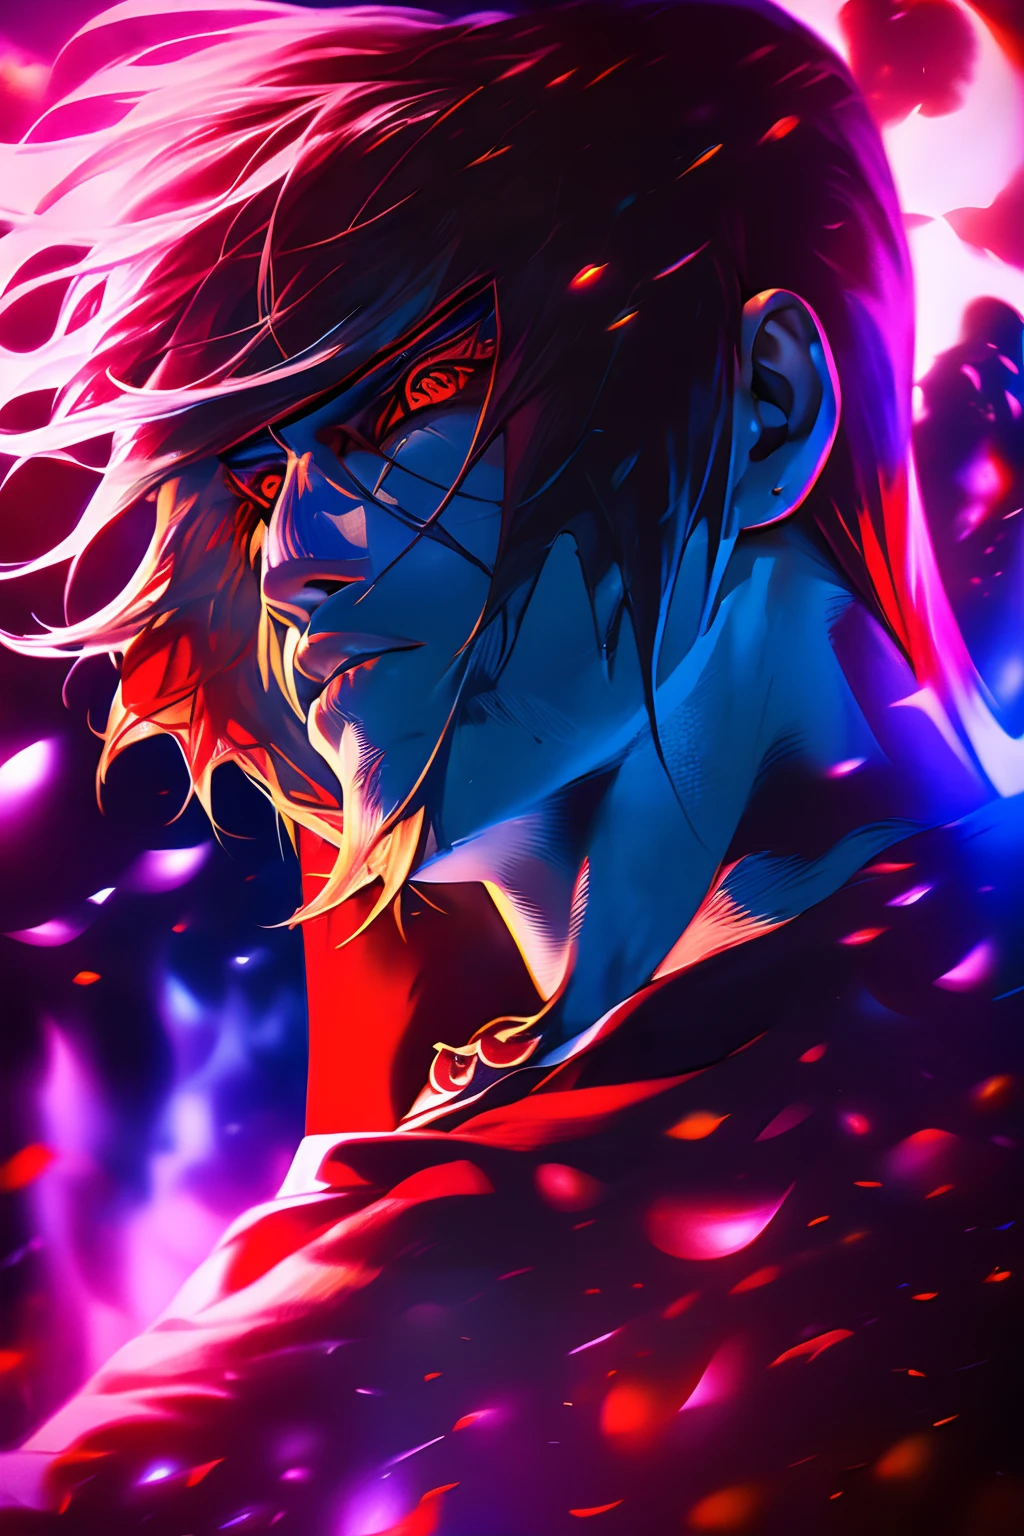 ' Create a powerful wallpaper that showcases the strength and charisma of (("Itachi Uchiha")). Itachi should be depicted in a formidable and captivating pose, with his Sharingan activated and Amaterasu flames in the background. Ensure the wallpaper exudes an aura of power and captivates the viewer with its intensity.